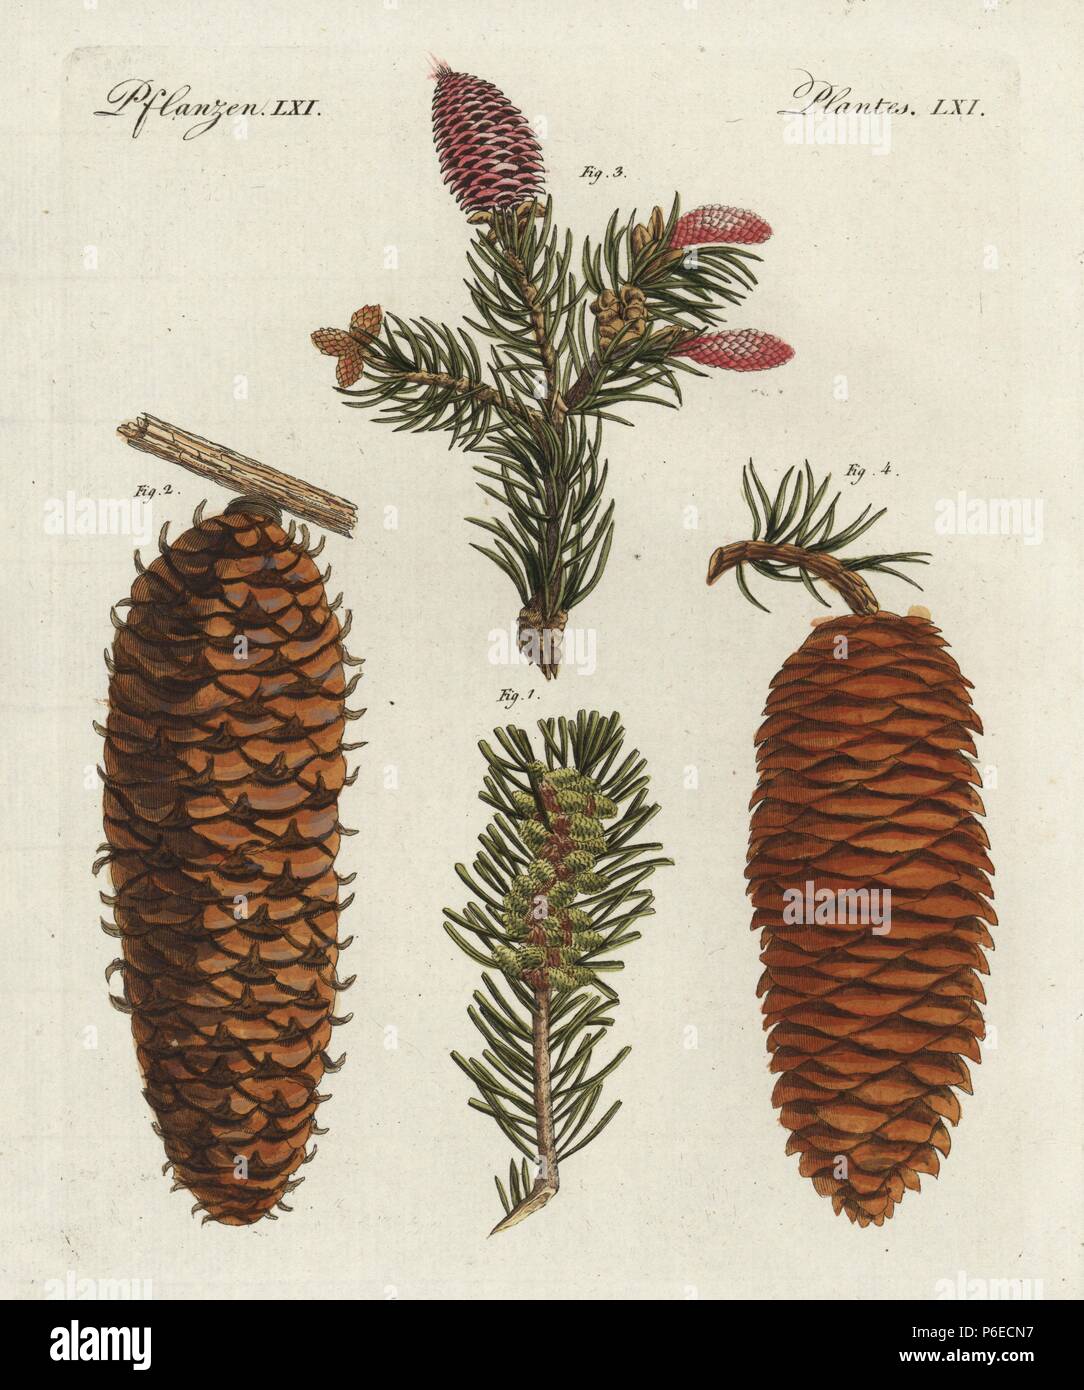 White spruce tree, Picea glauca, foliage 1 and cone 2, and Norway spruce, Picea abies, foliage 3 and cone 4. Handcoloured copperplate engraving from Bertuch's 'Bilderbuch fur Kinder' (Picture Book for Children), Weimar, 1798. Friedrich Johann Bertuch (1747-1822) was a German publisher and man of arts most famous for his 12-volume encyclopedia for children illustrated with 1,200 engraved plates on natural history, science, costume, mythology, etc., published from 1790-1830. Stock Photo